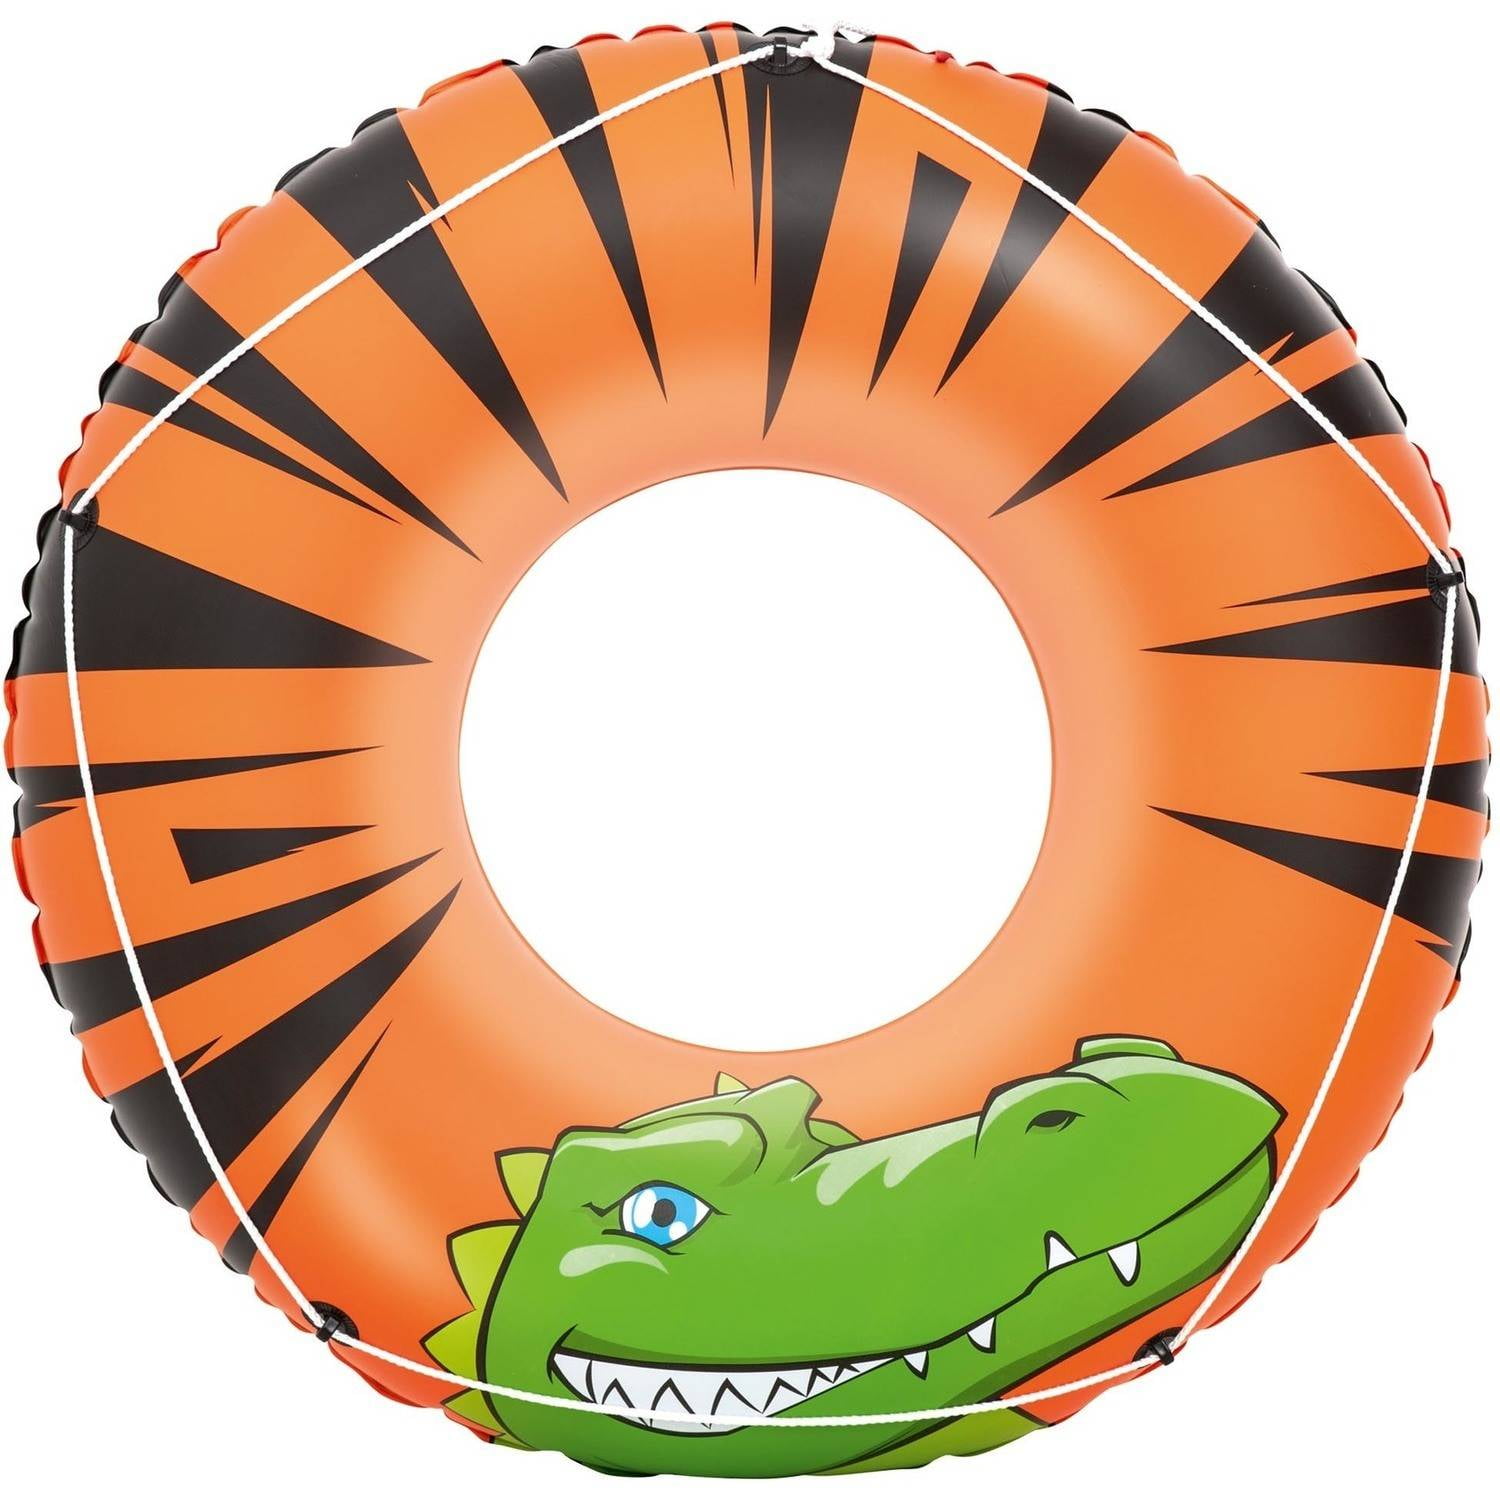 INFLATABLE RIVER GATOR 47 INCH RUBBER RING SWIMMING POOL RIDE ON TUBE 